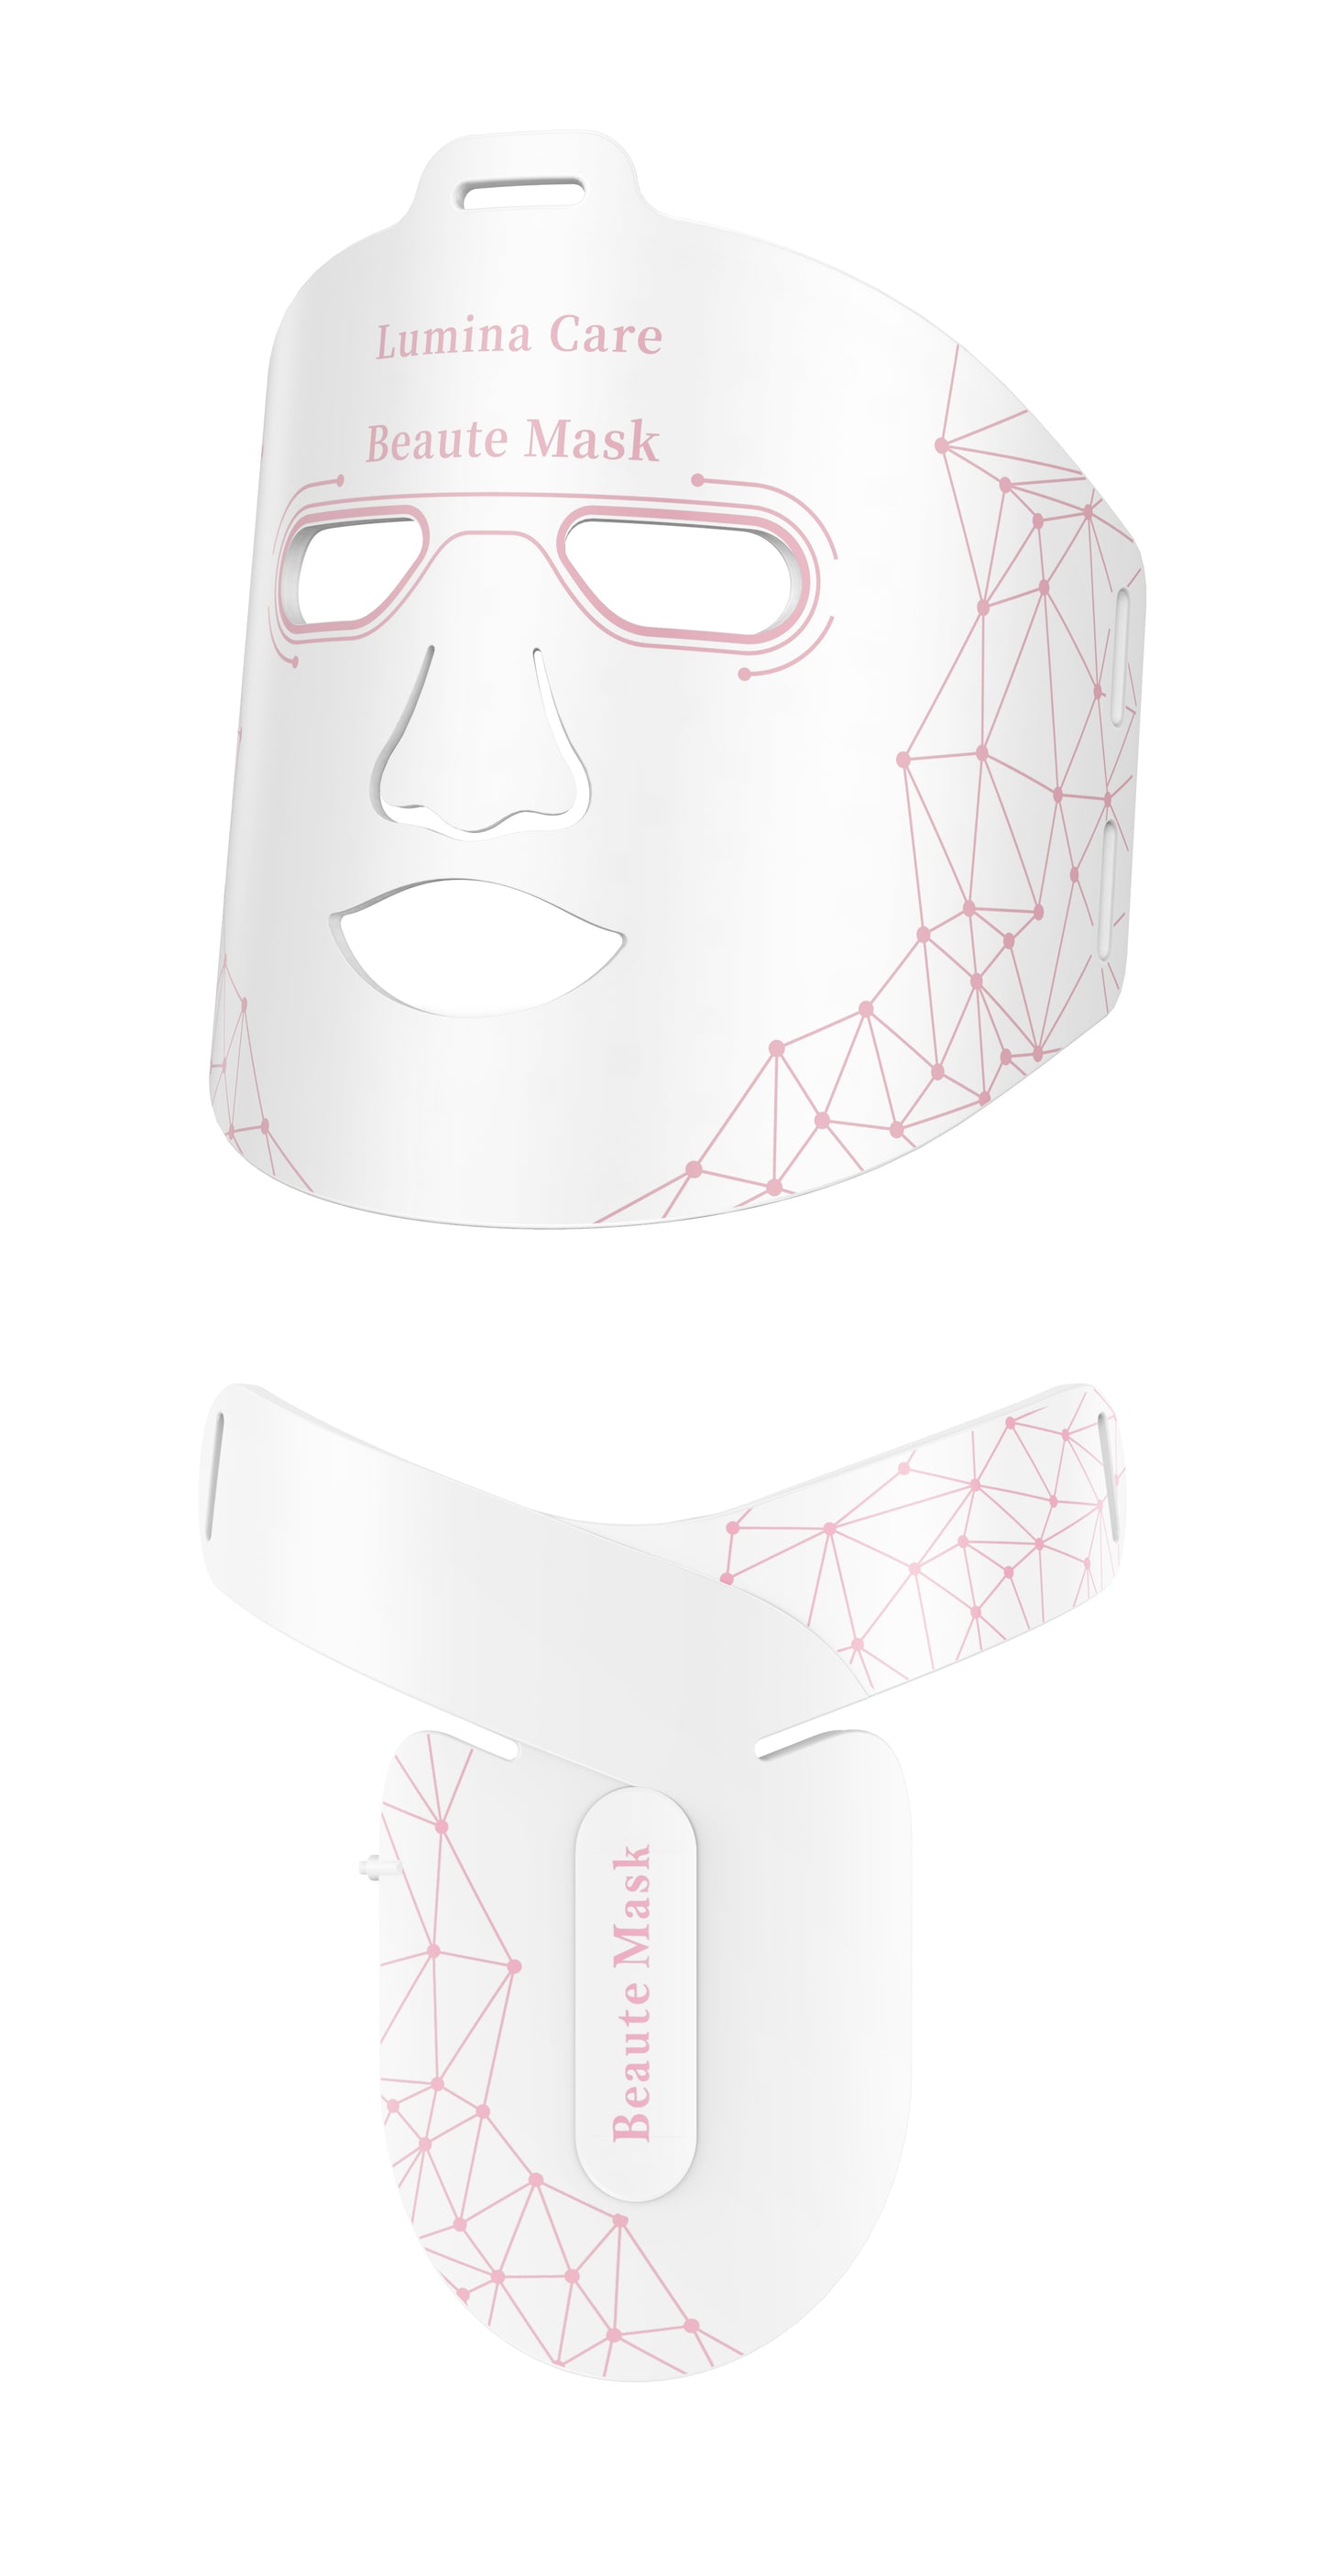 Face & Neck Therapy Led mask